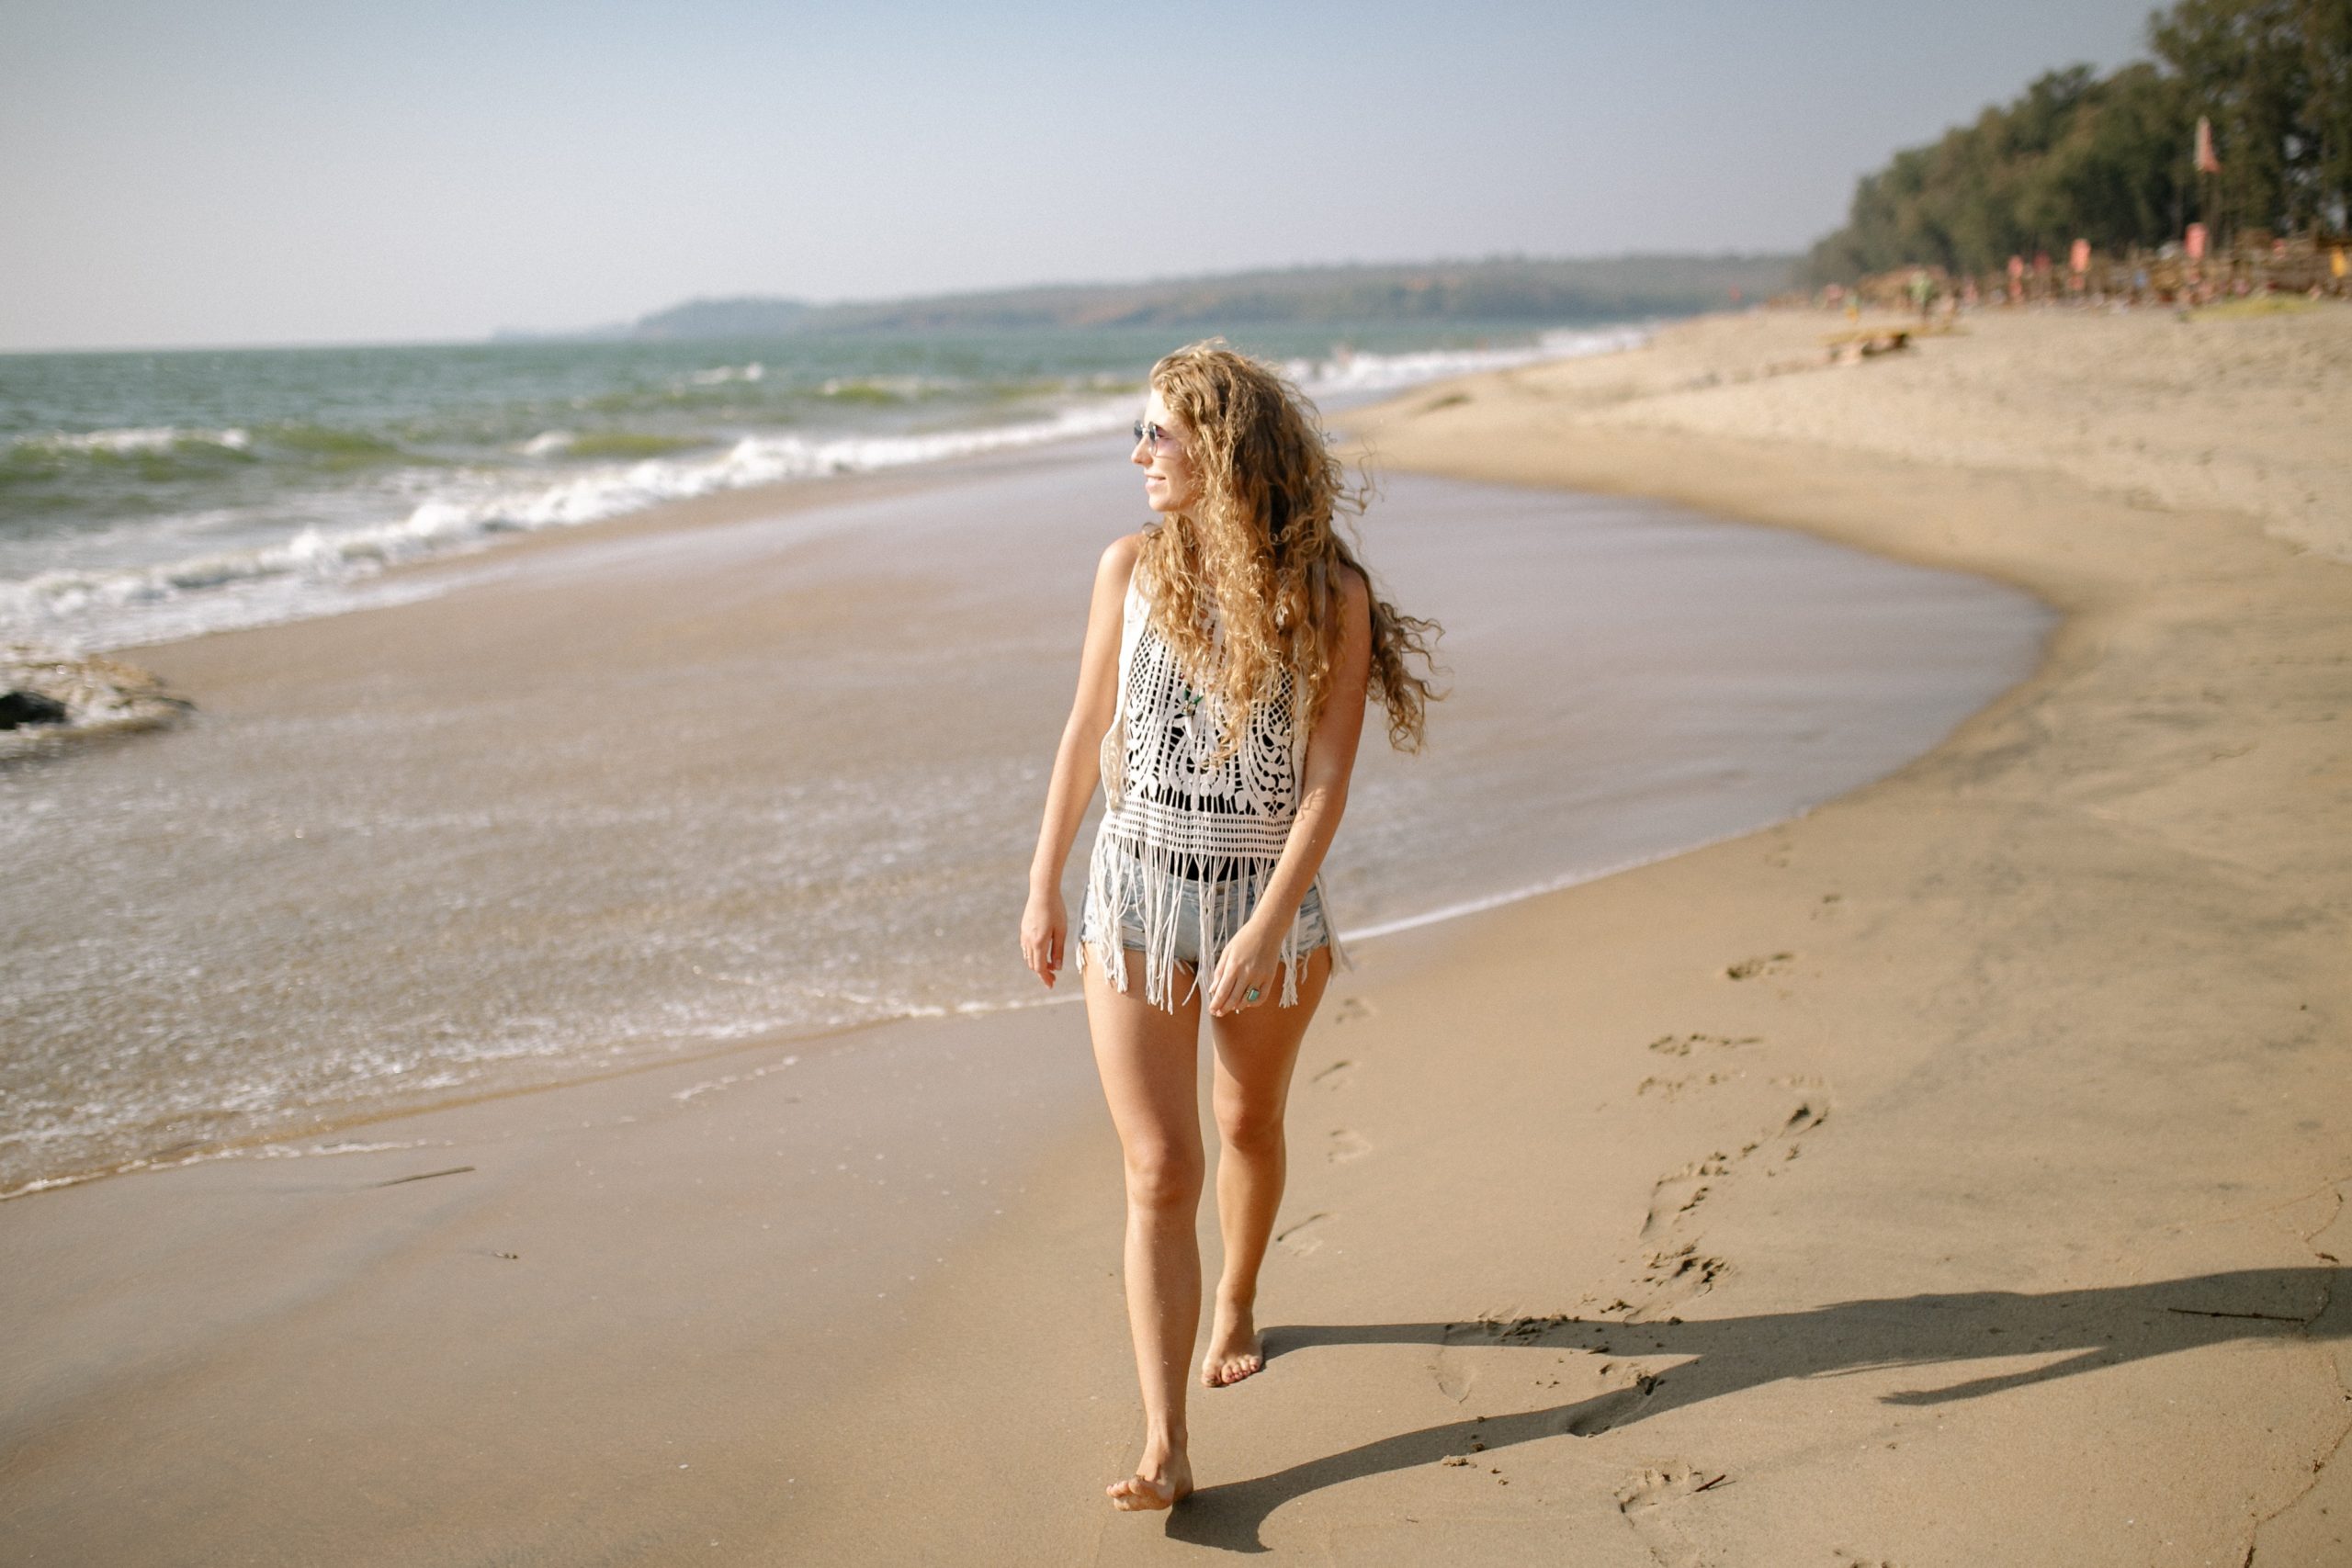 Walking on the beach: 5 benefits of walking barefoot on the beach